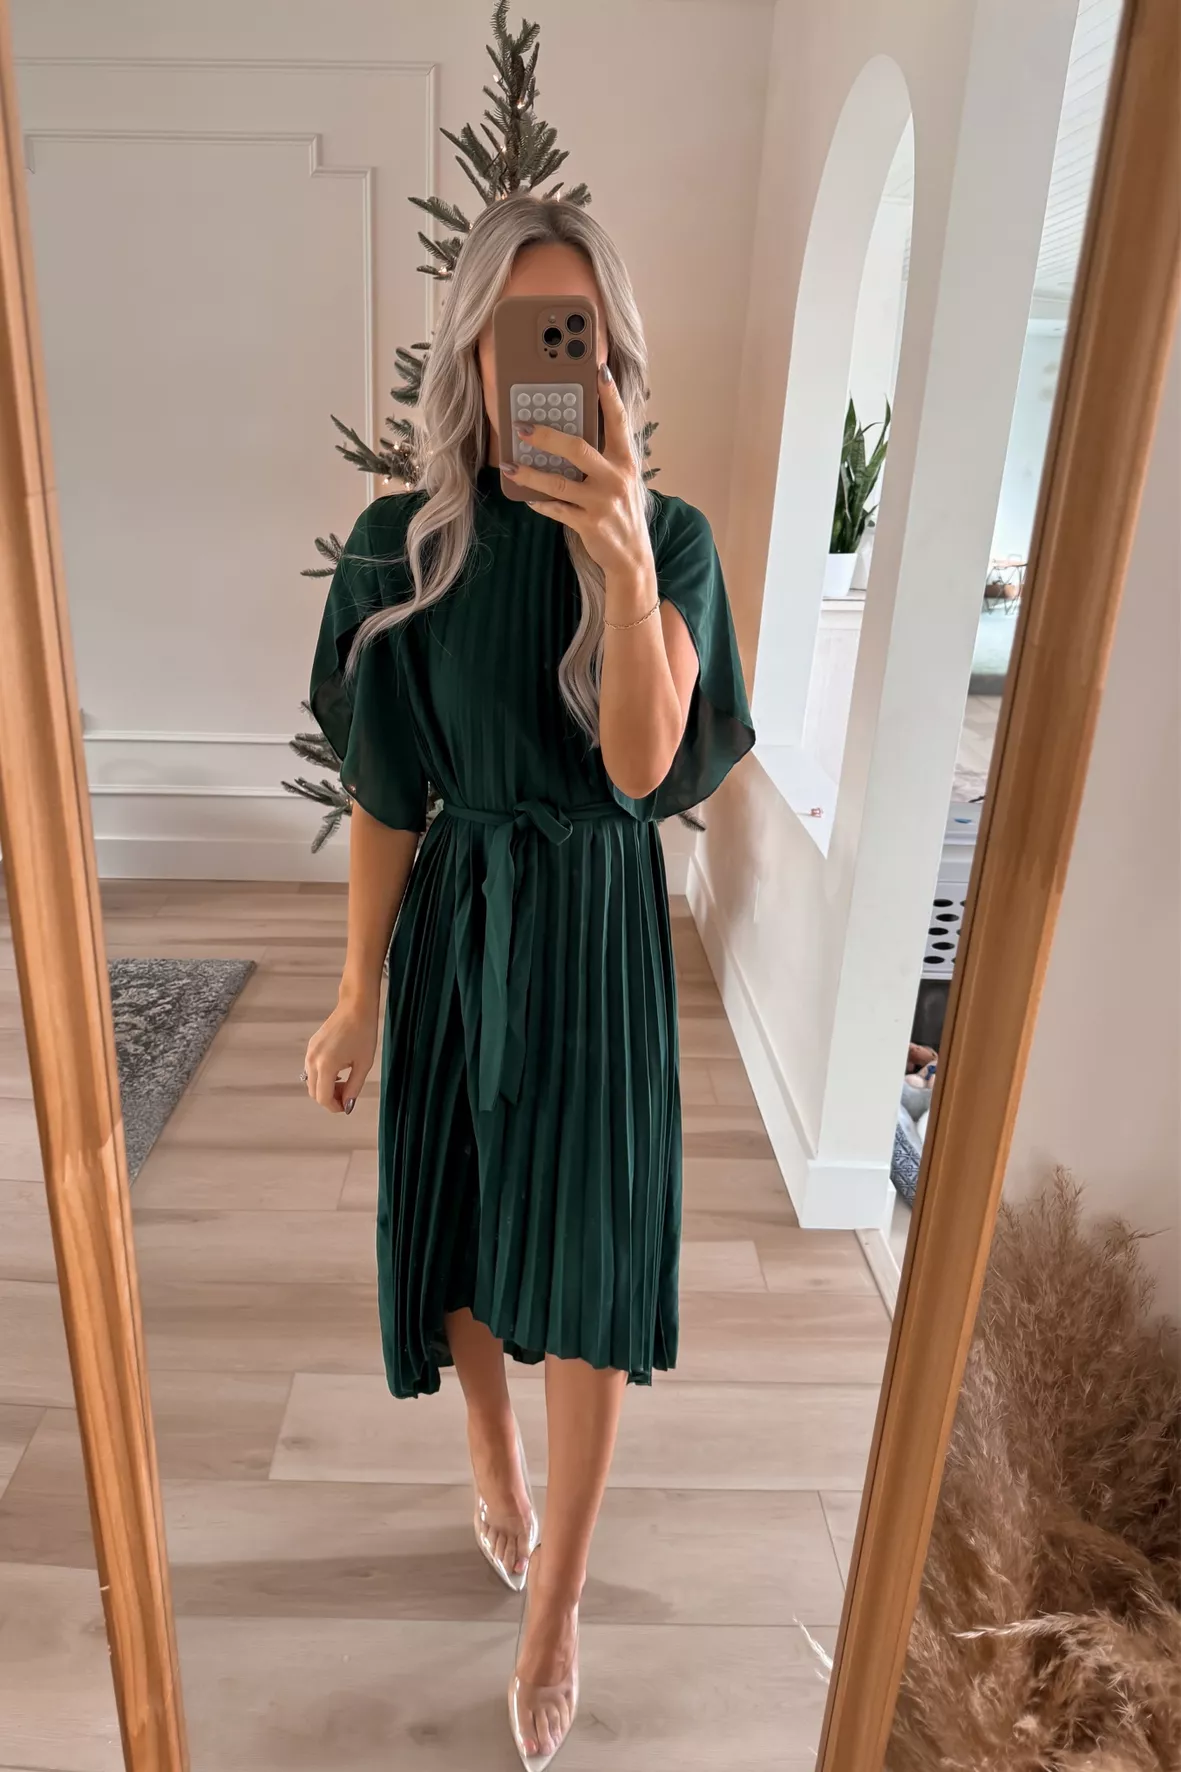 Wrap dress styled for summer and winter